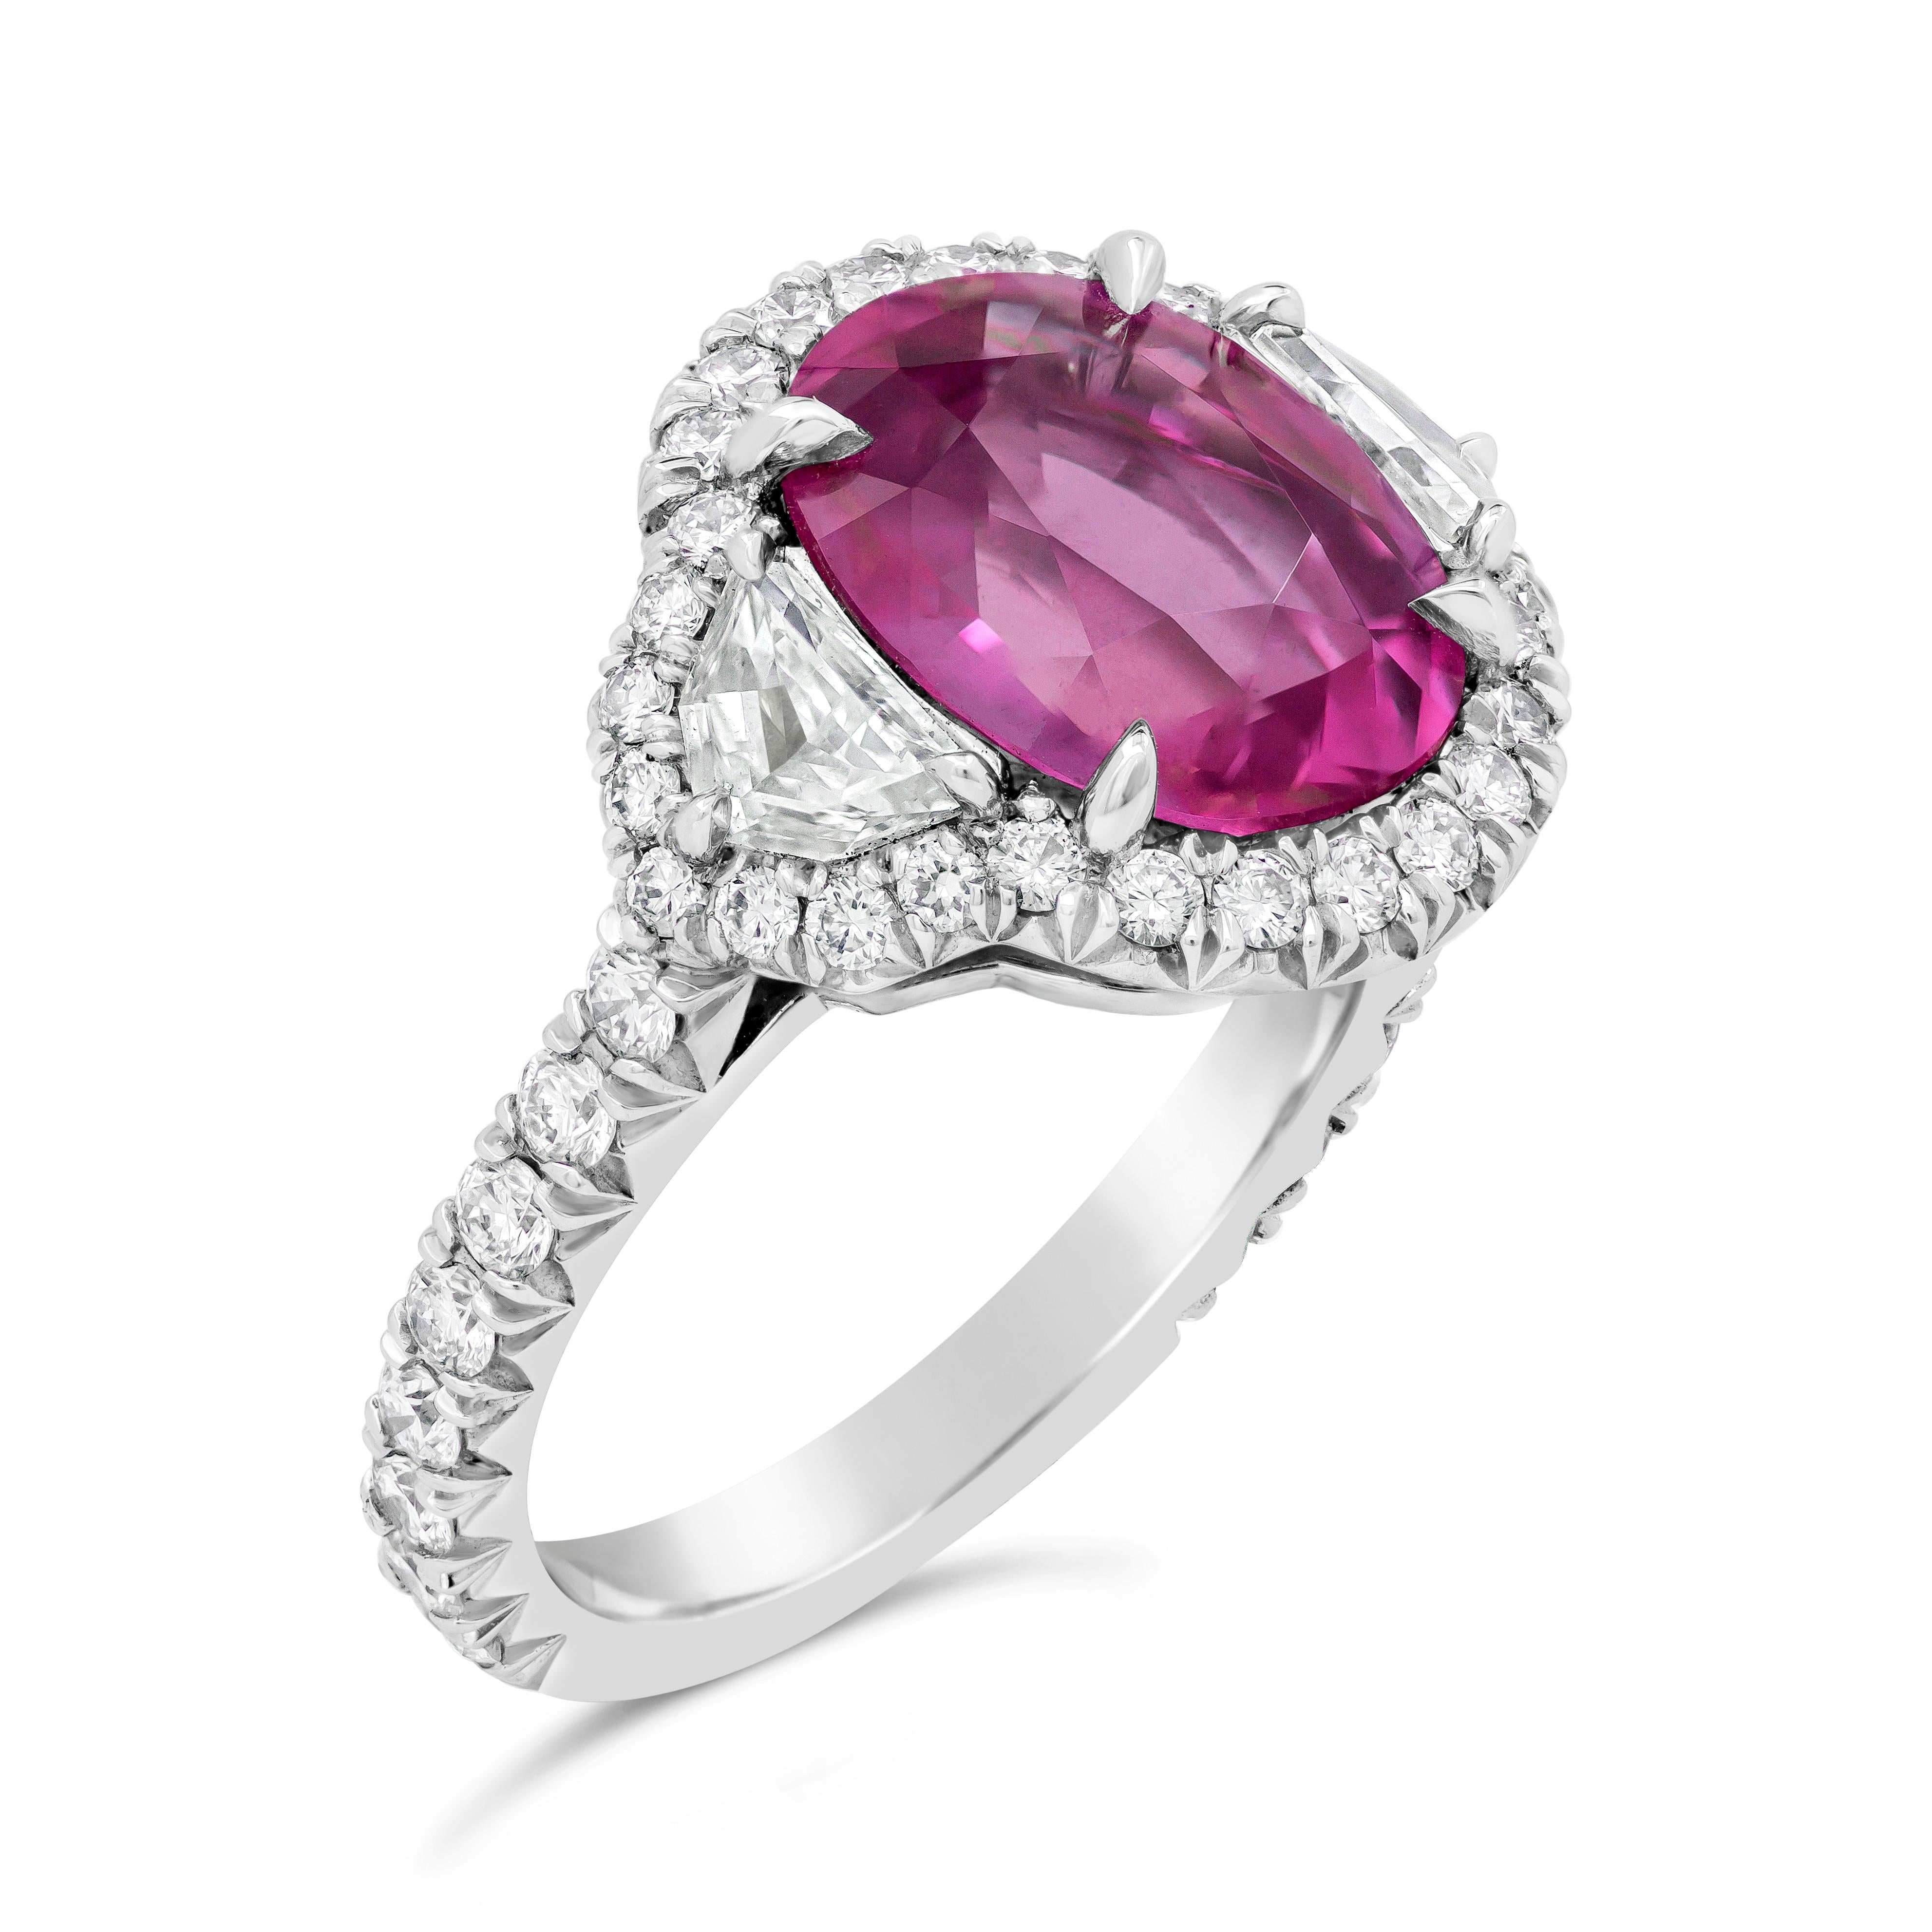 A charming three stone engagement ring style showcasing a AGL Certified oval cut pink sapphire weighing 5.73 carat total. Flanked on each side are epaulette diamonds weighing 0.56 carats. Surrounded and accented by brilliant round diamonds in a halo